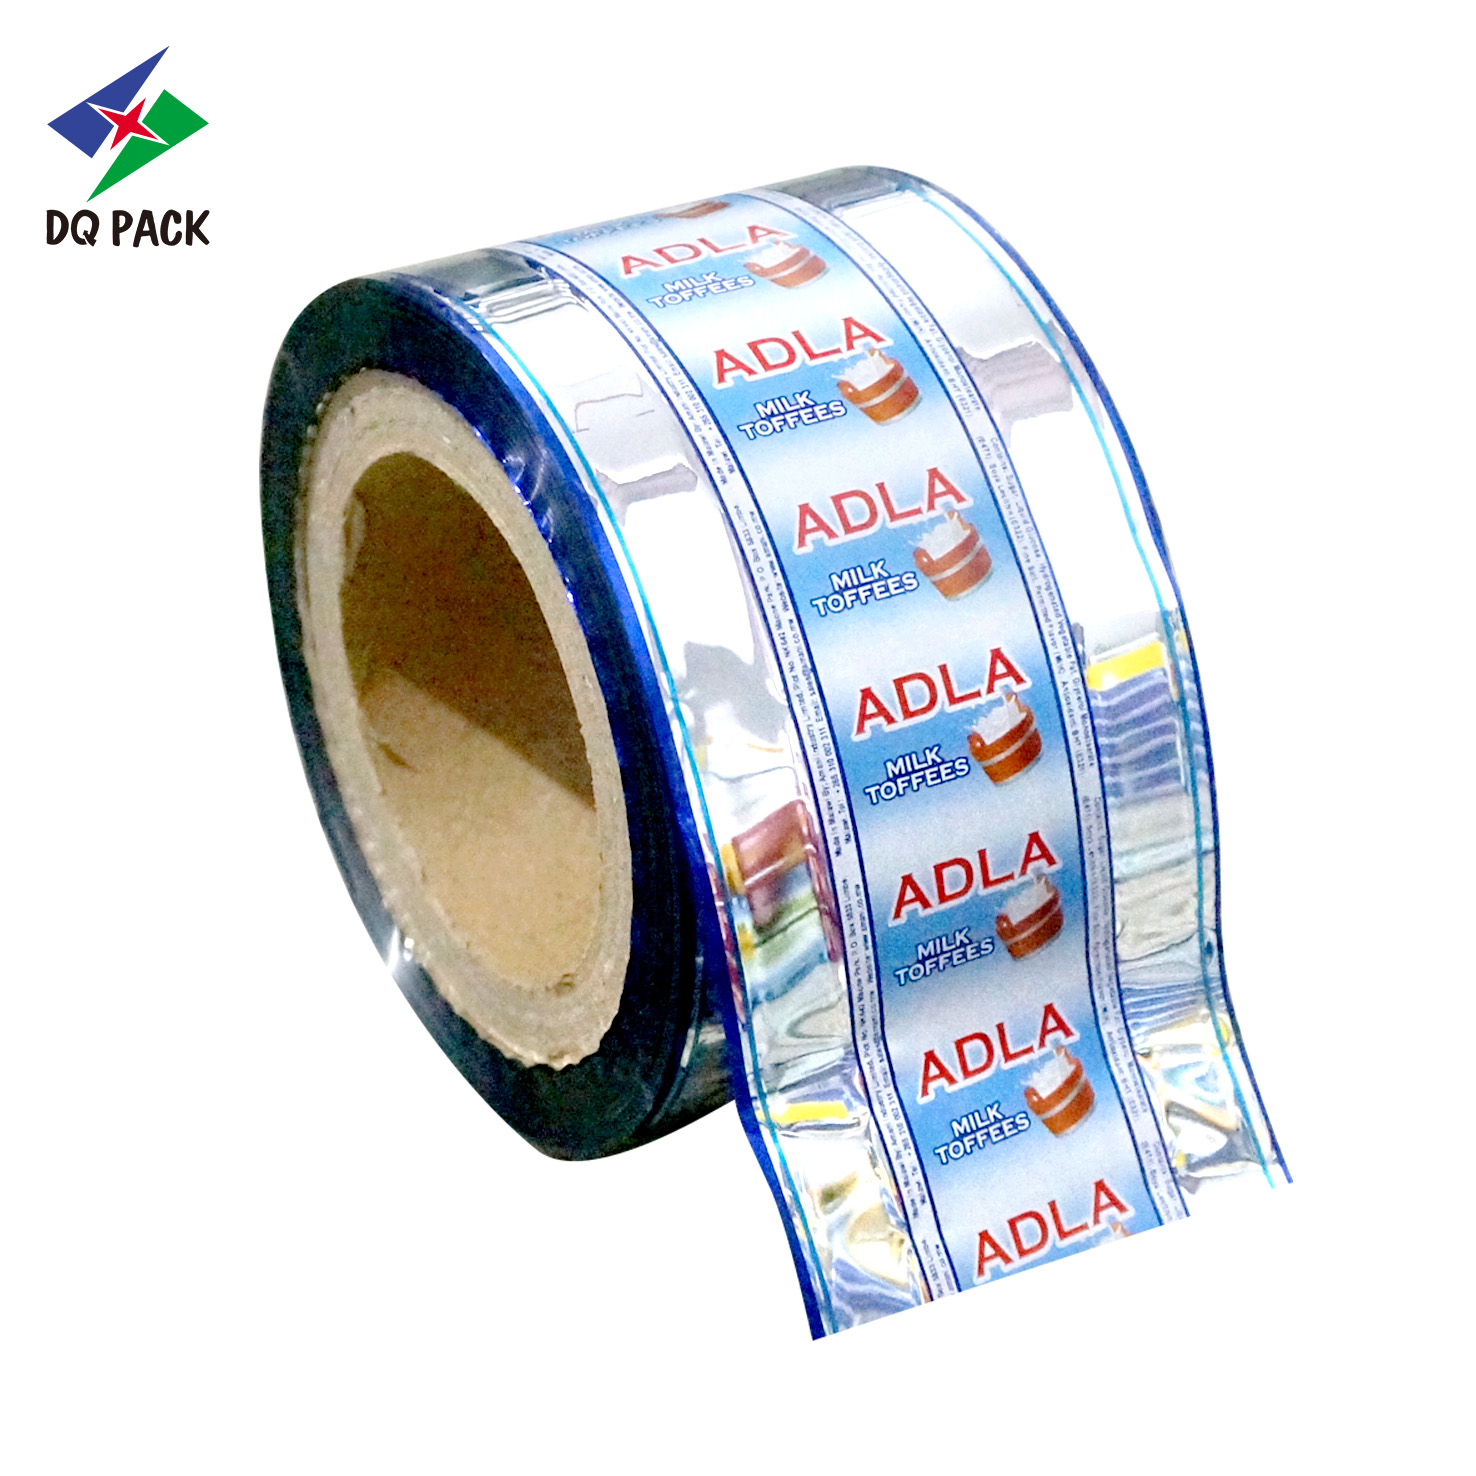 DQ PACK Custom Printed Candy Chocolate Pet Twisted Film Packaging Film  Roll Stock Film For  Tuffees